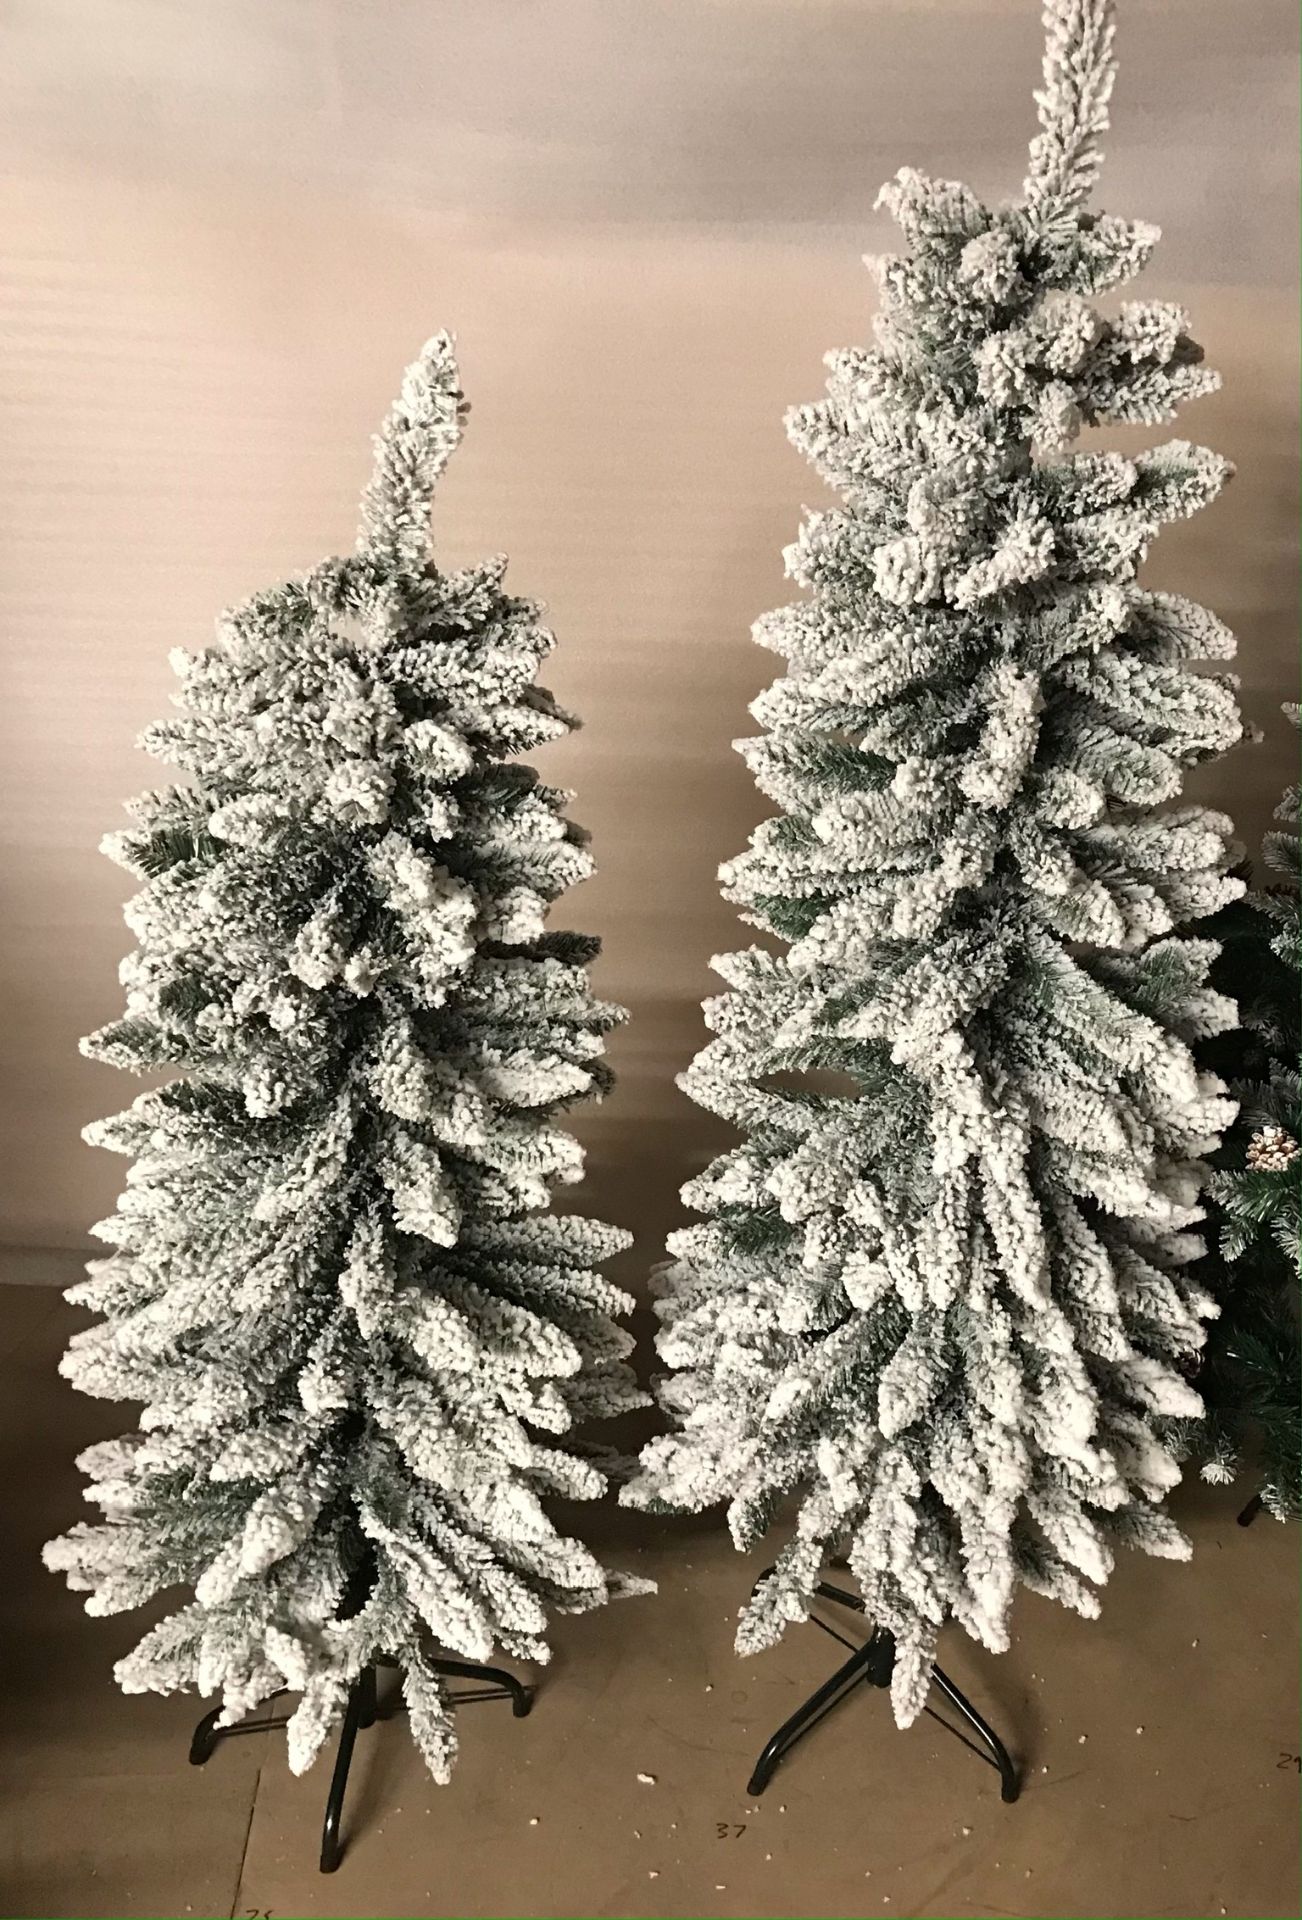 2 x 5ft Christmas Tree Artificial with Snow Frosted Tips Slim Pencil Shape - Image 2 of 2